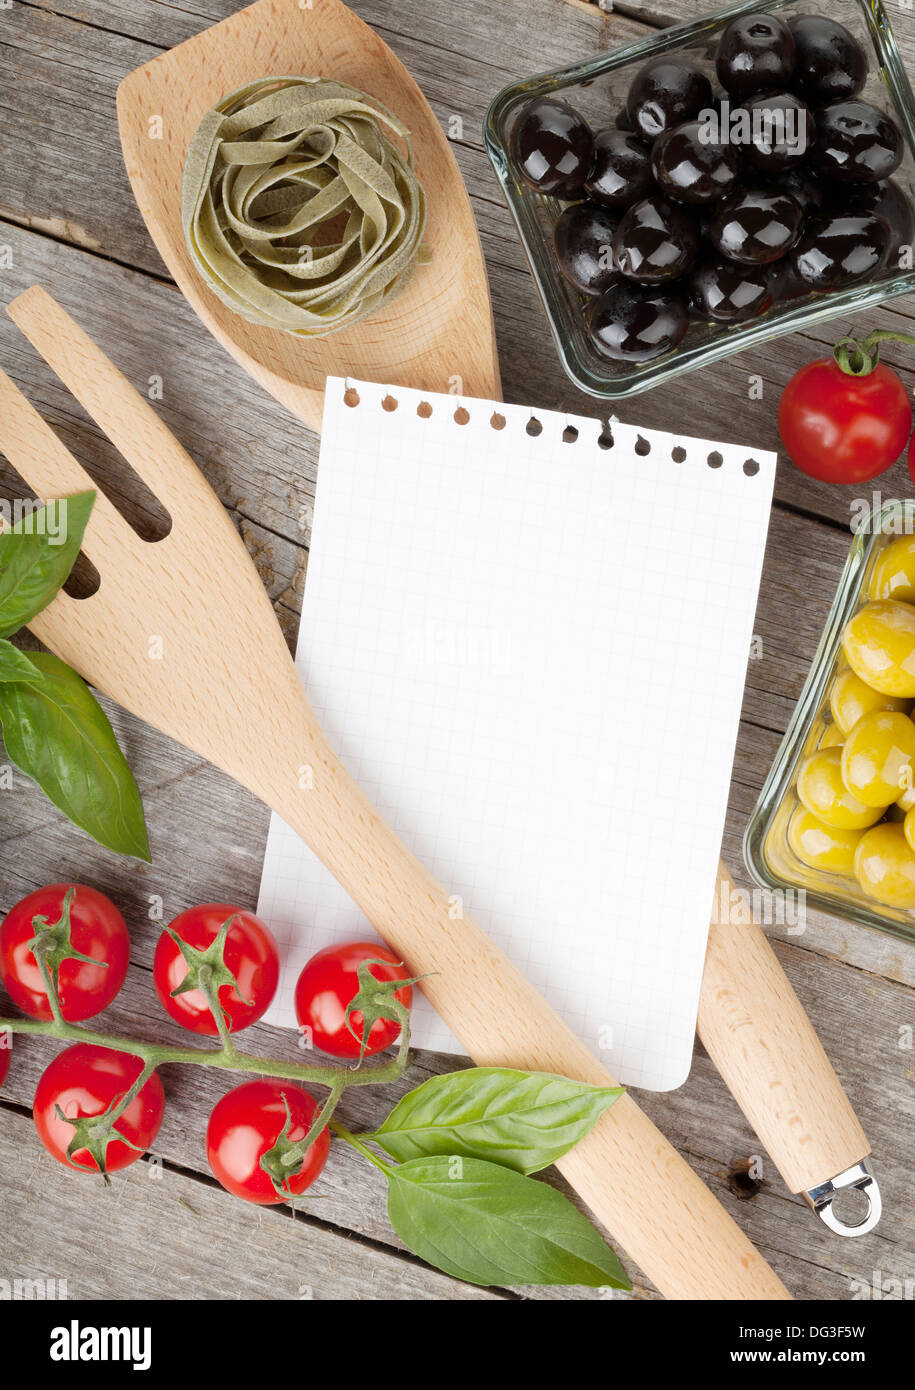 https://c8.alamy.com/comp/DG3F5W/blank-notepad-paper-for-your-recipes-and-food-on-wooden-table-DG3F5W.jpg